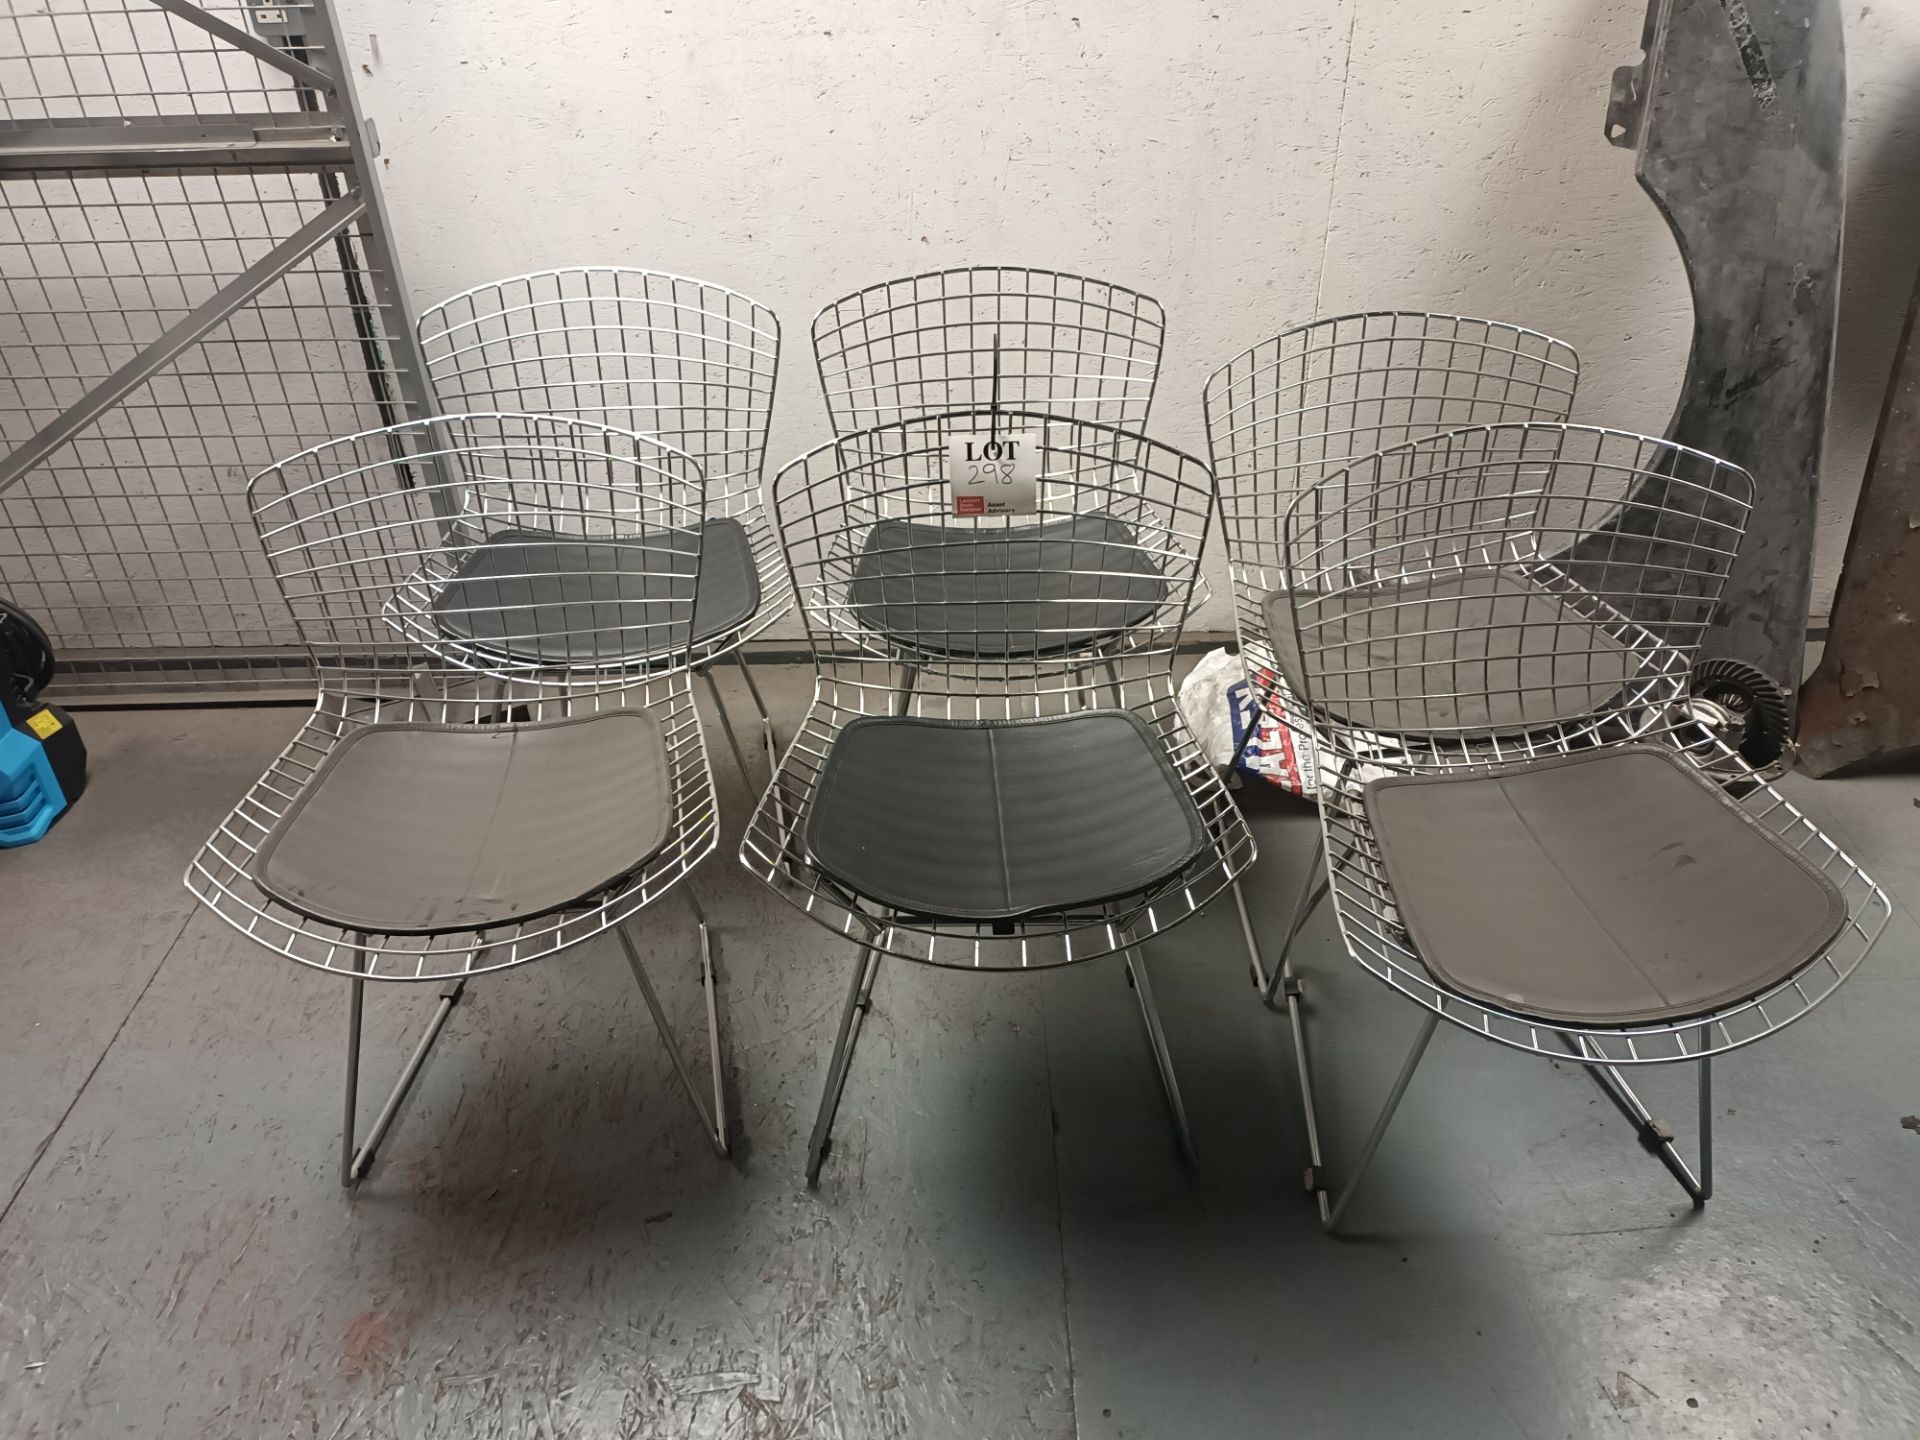 Six metal frame garden chairs with black seat cushion